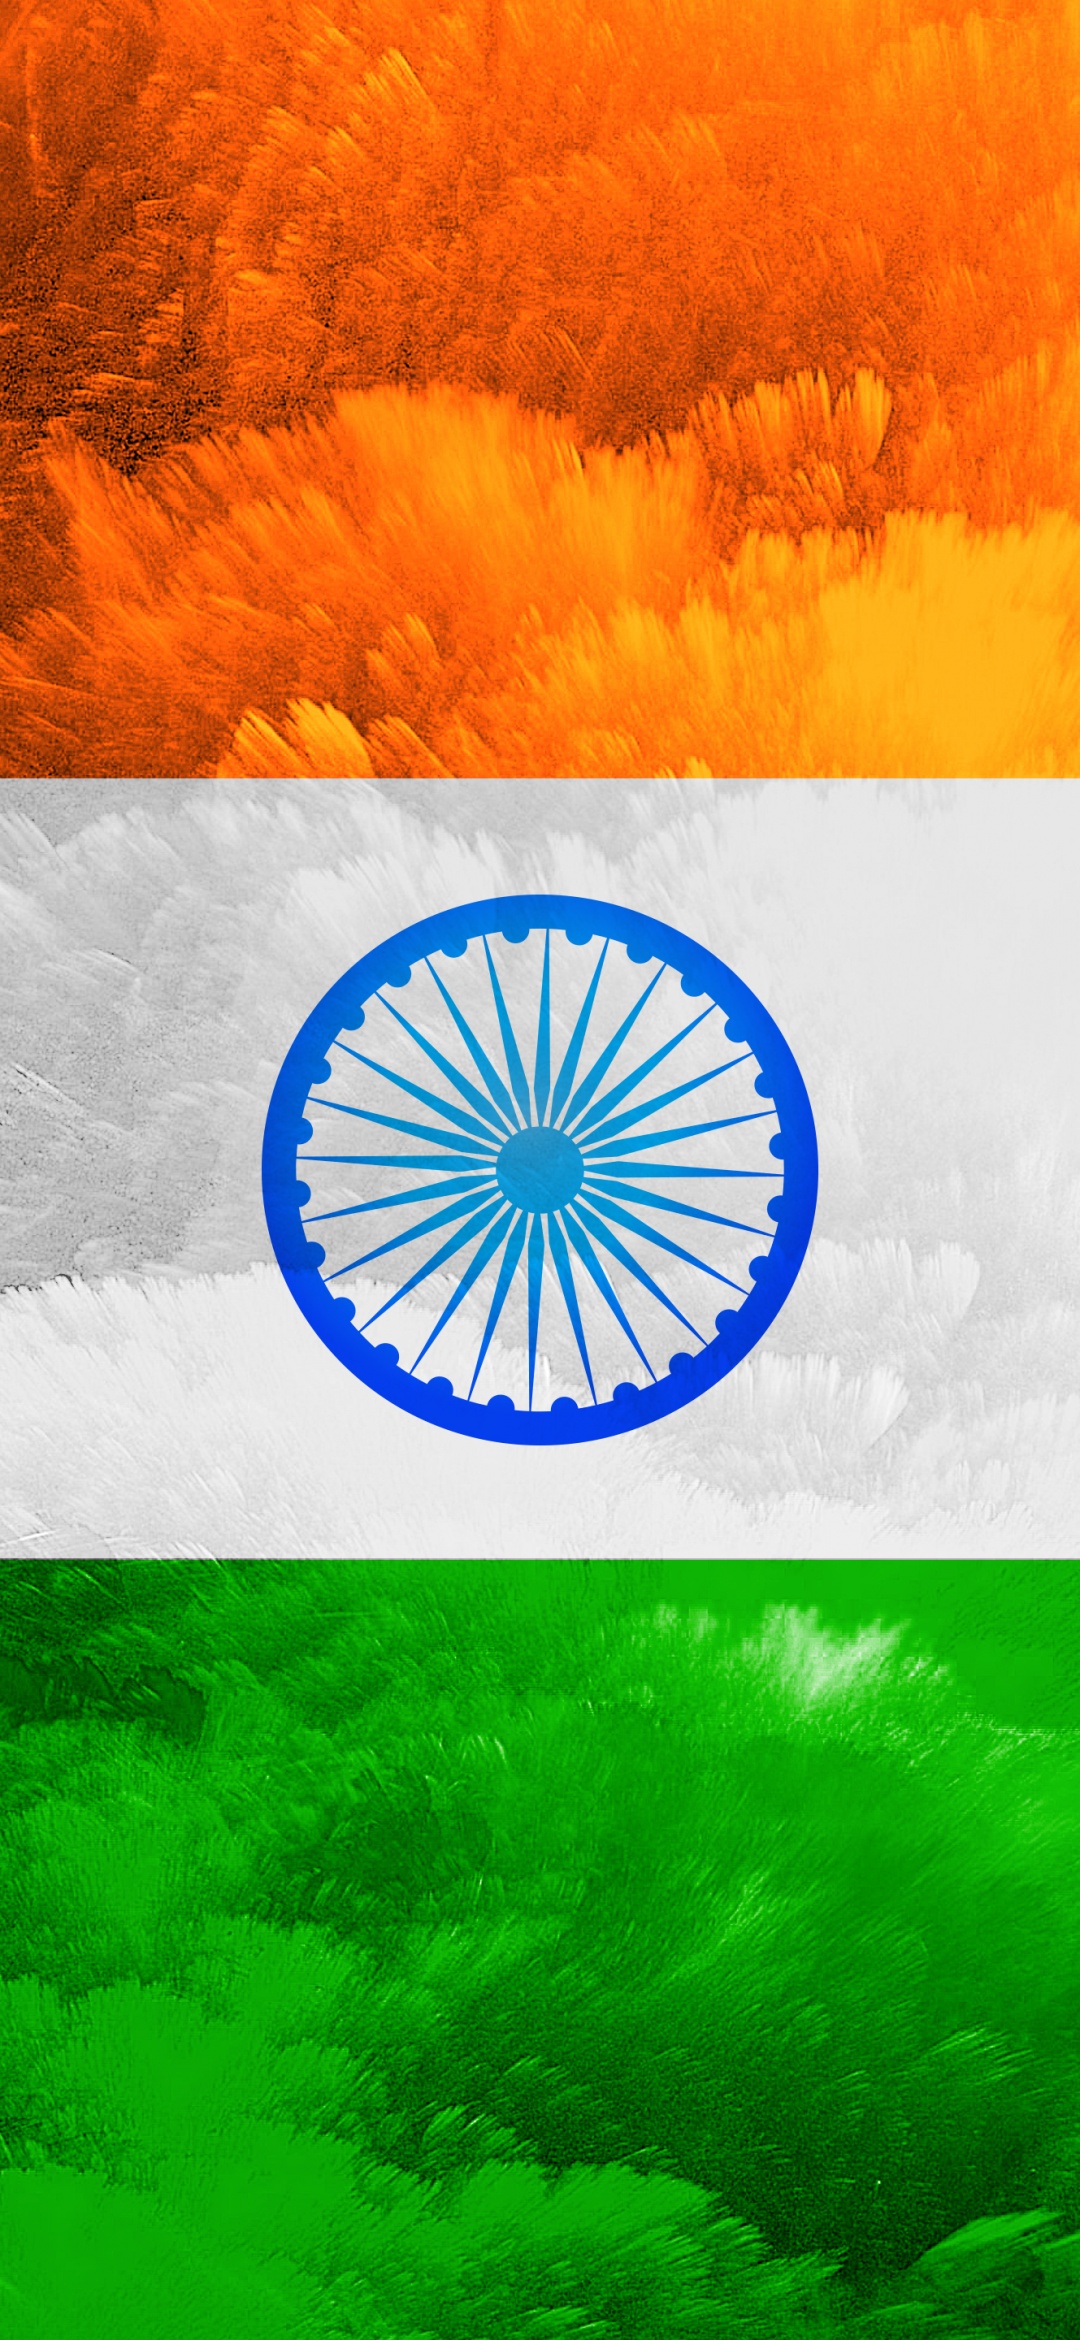 HD Wallpaper Download - India Flag for Mobile Phone Wallpaper 11 of 17 –  Tricolour India Flag #RepublicDay #RepublicDay2021 #RepublicDayParade  #RepublicDayContest #RepublicDayIndia #RepublicDaySpecial  http://allpicts.in/india-flag-mobile-phone ...